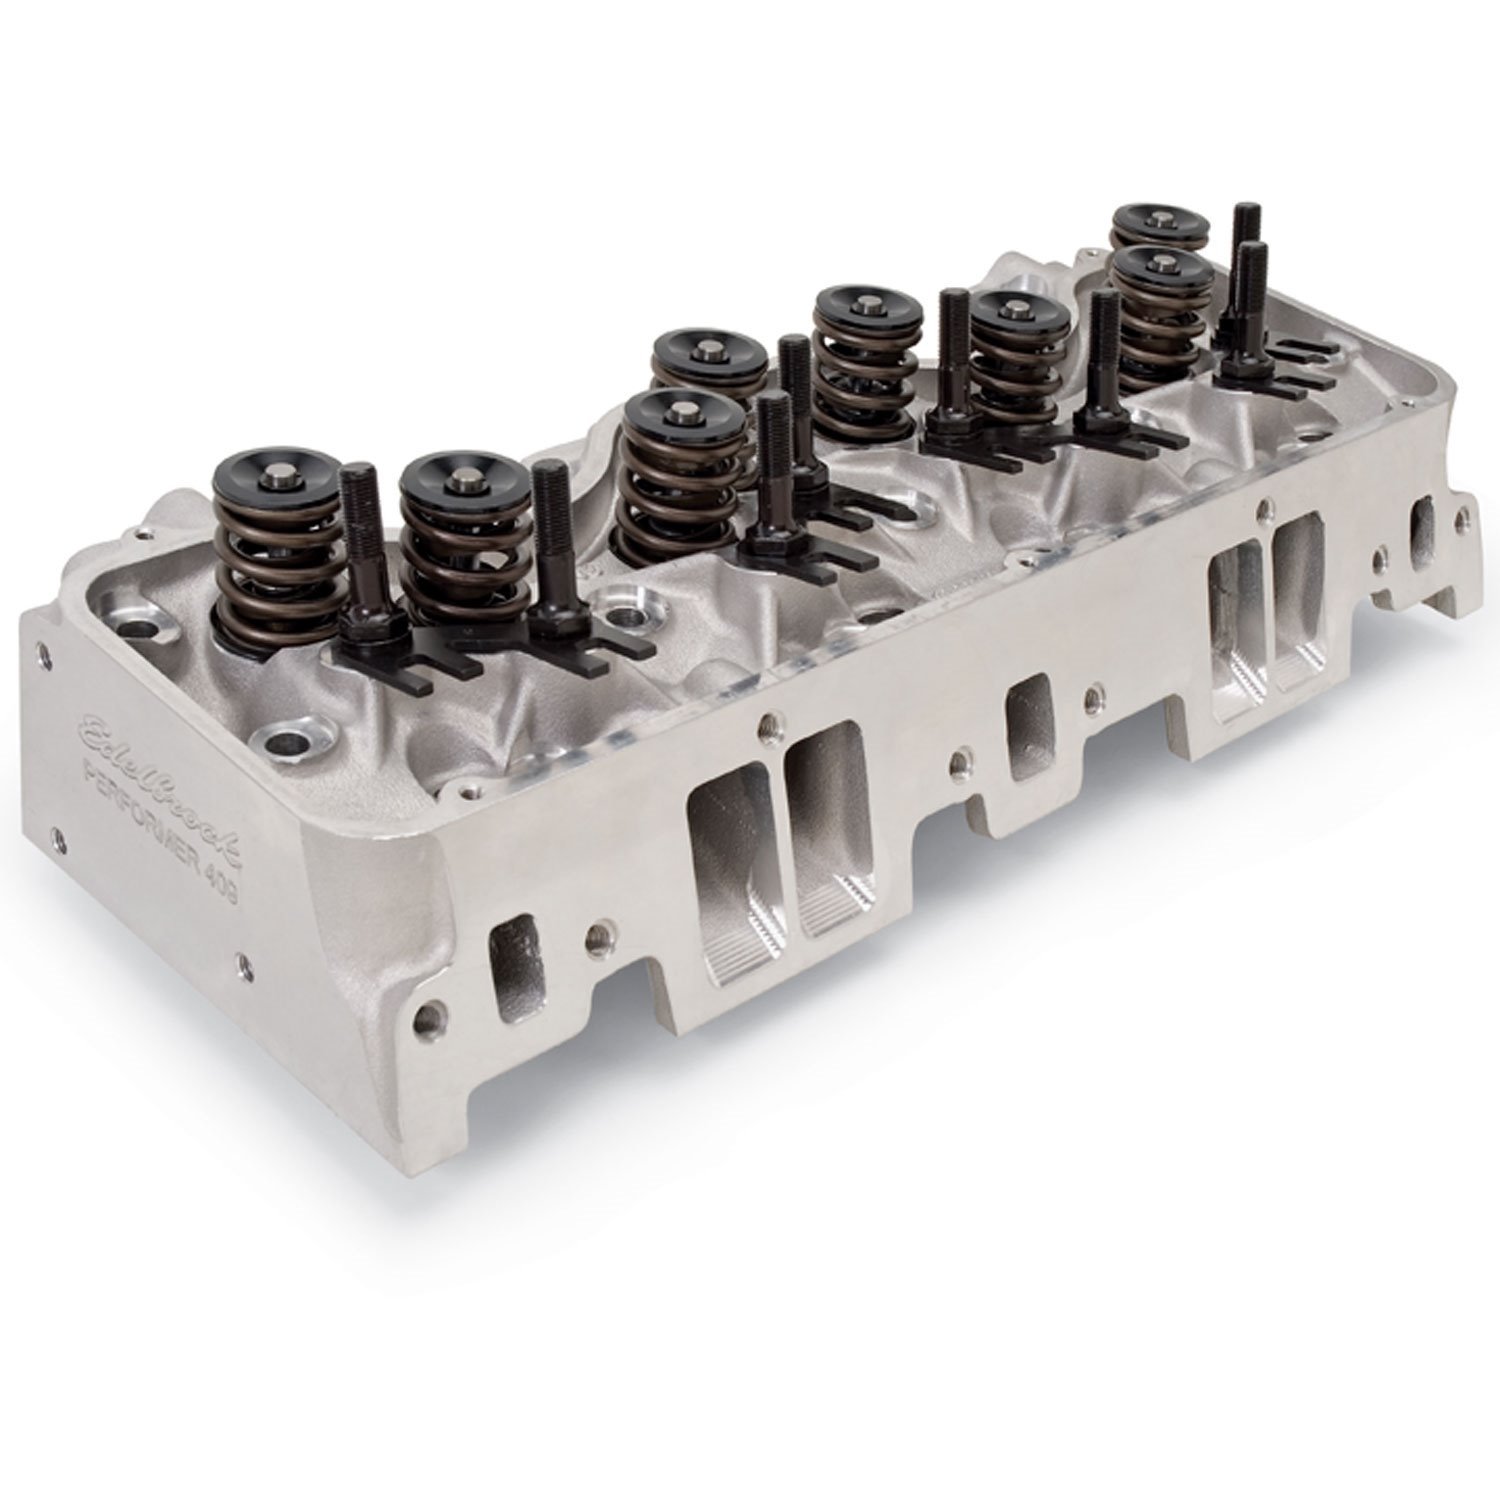 Performer RPM Chevy W-Series 348/409 Polished Cylinder Heads